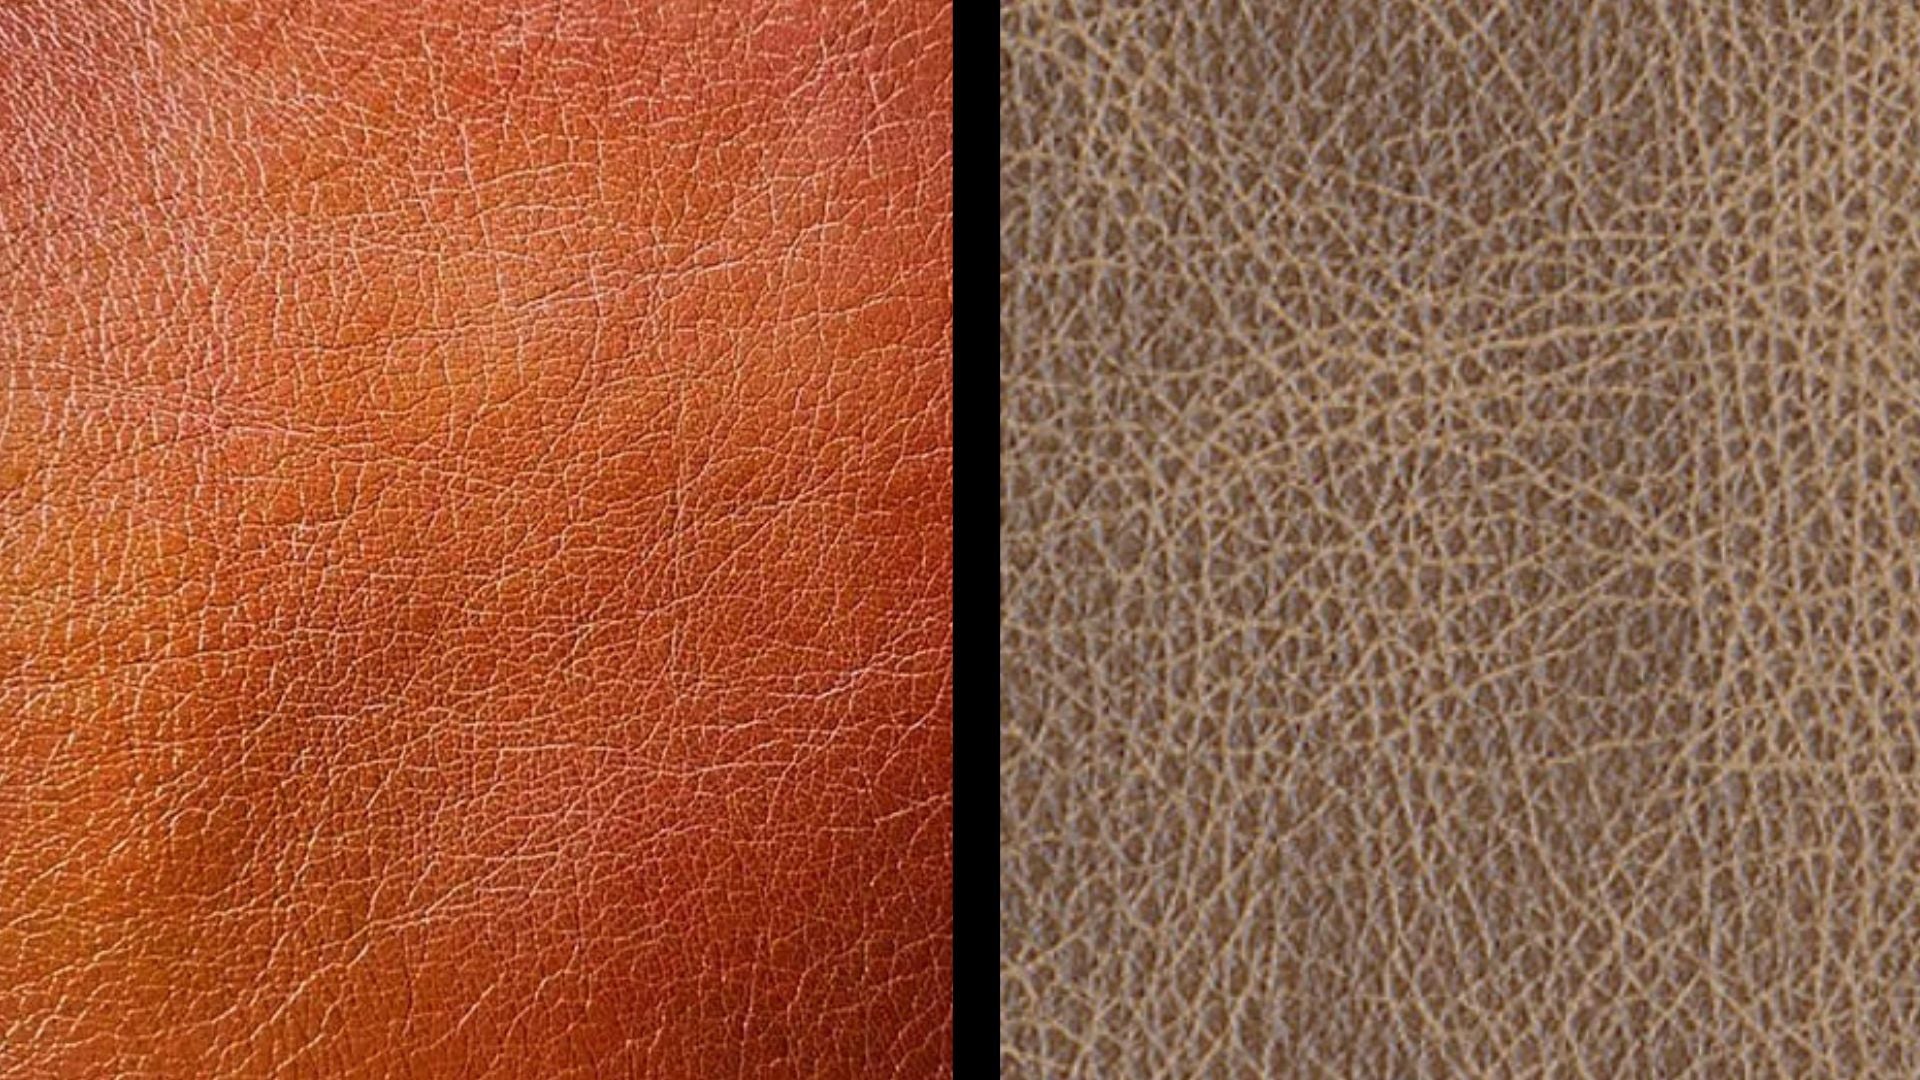 Vegan Leather Vs Real Leather: All You Need To Know